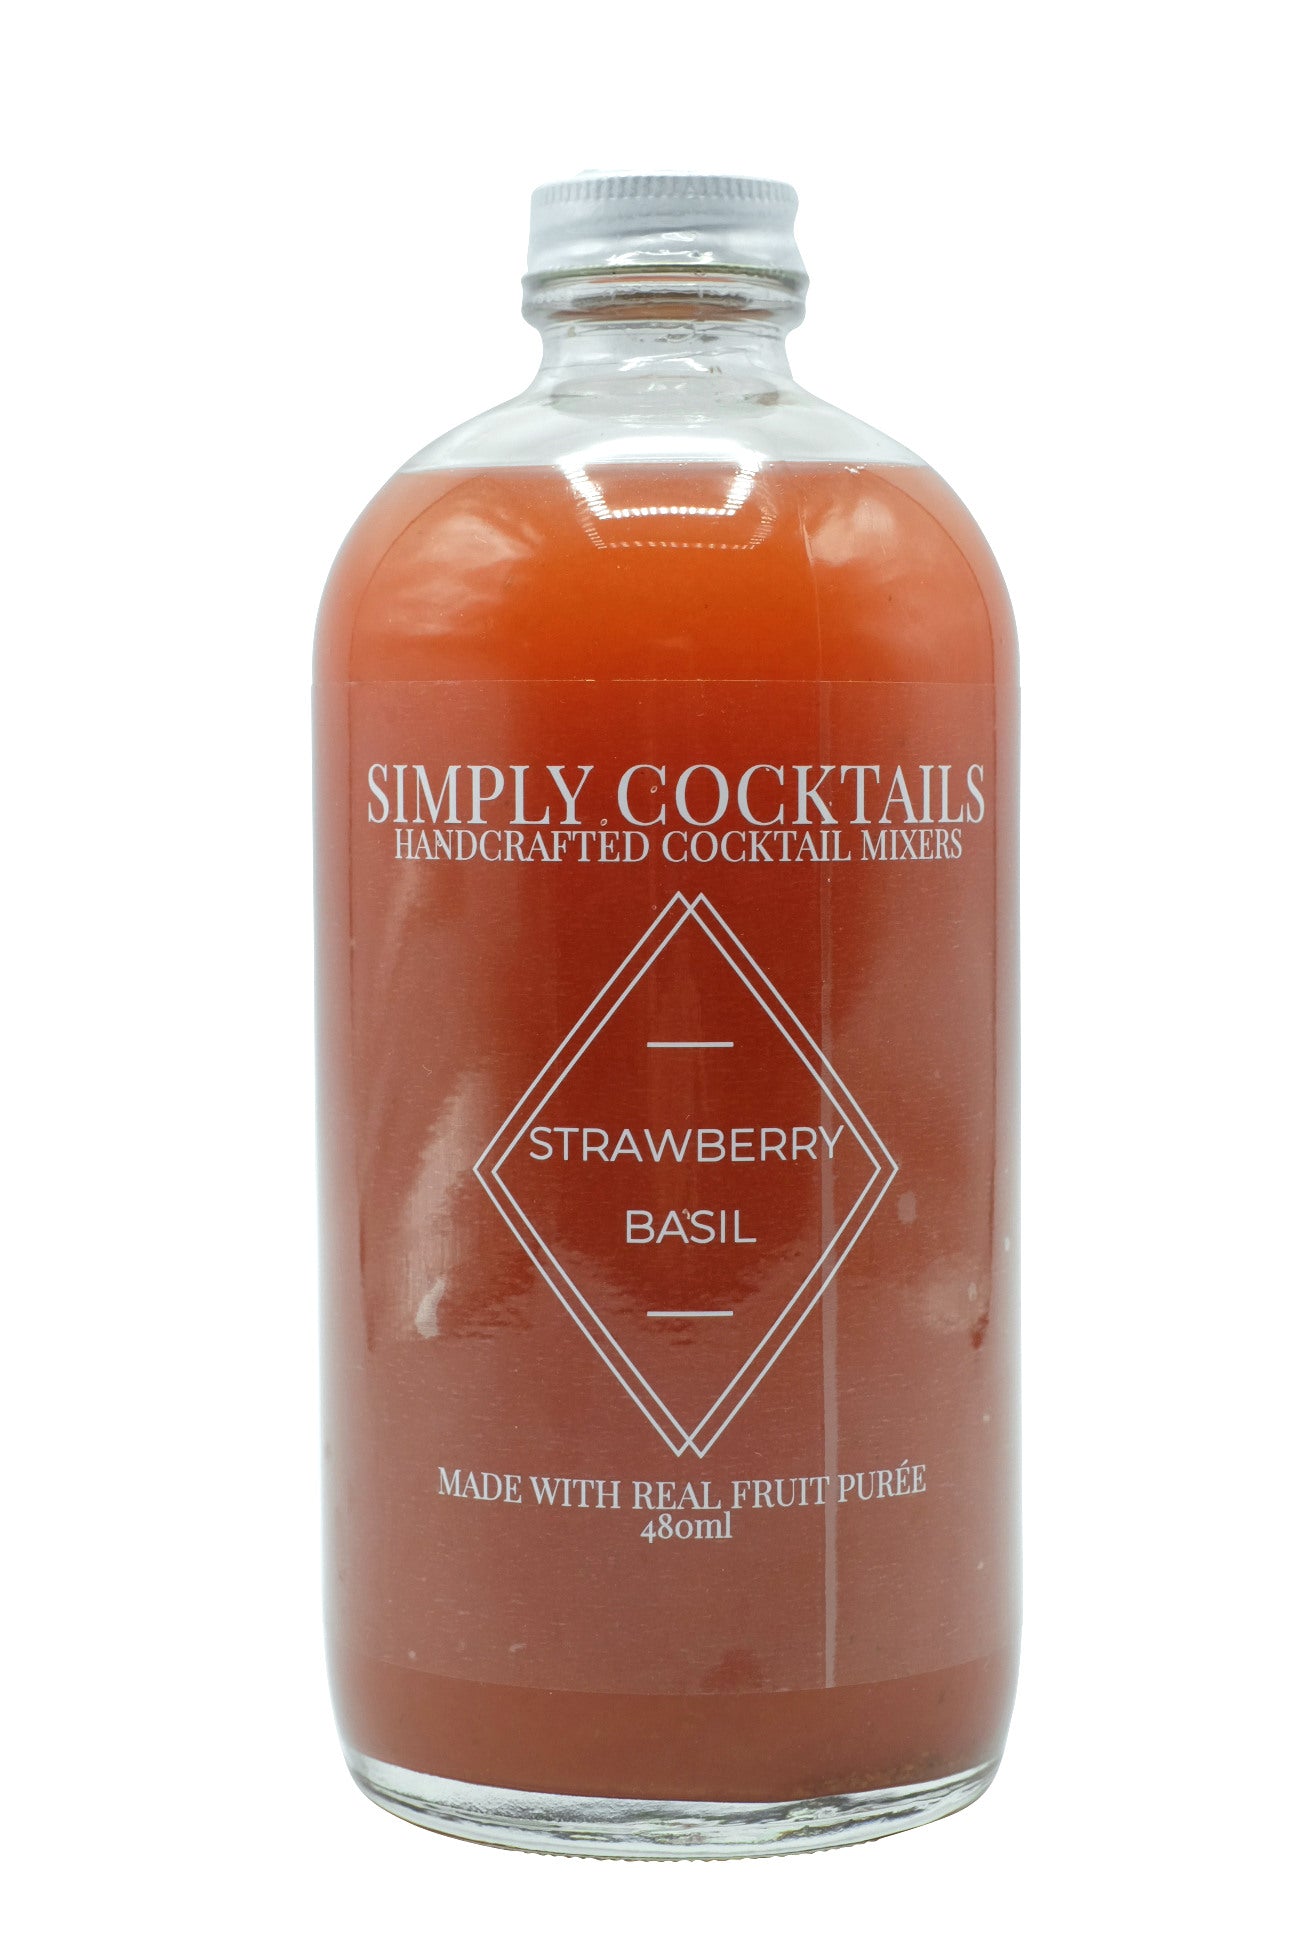 Simply Cocktails Strawberry Basil